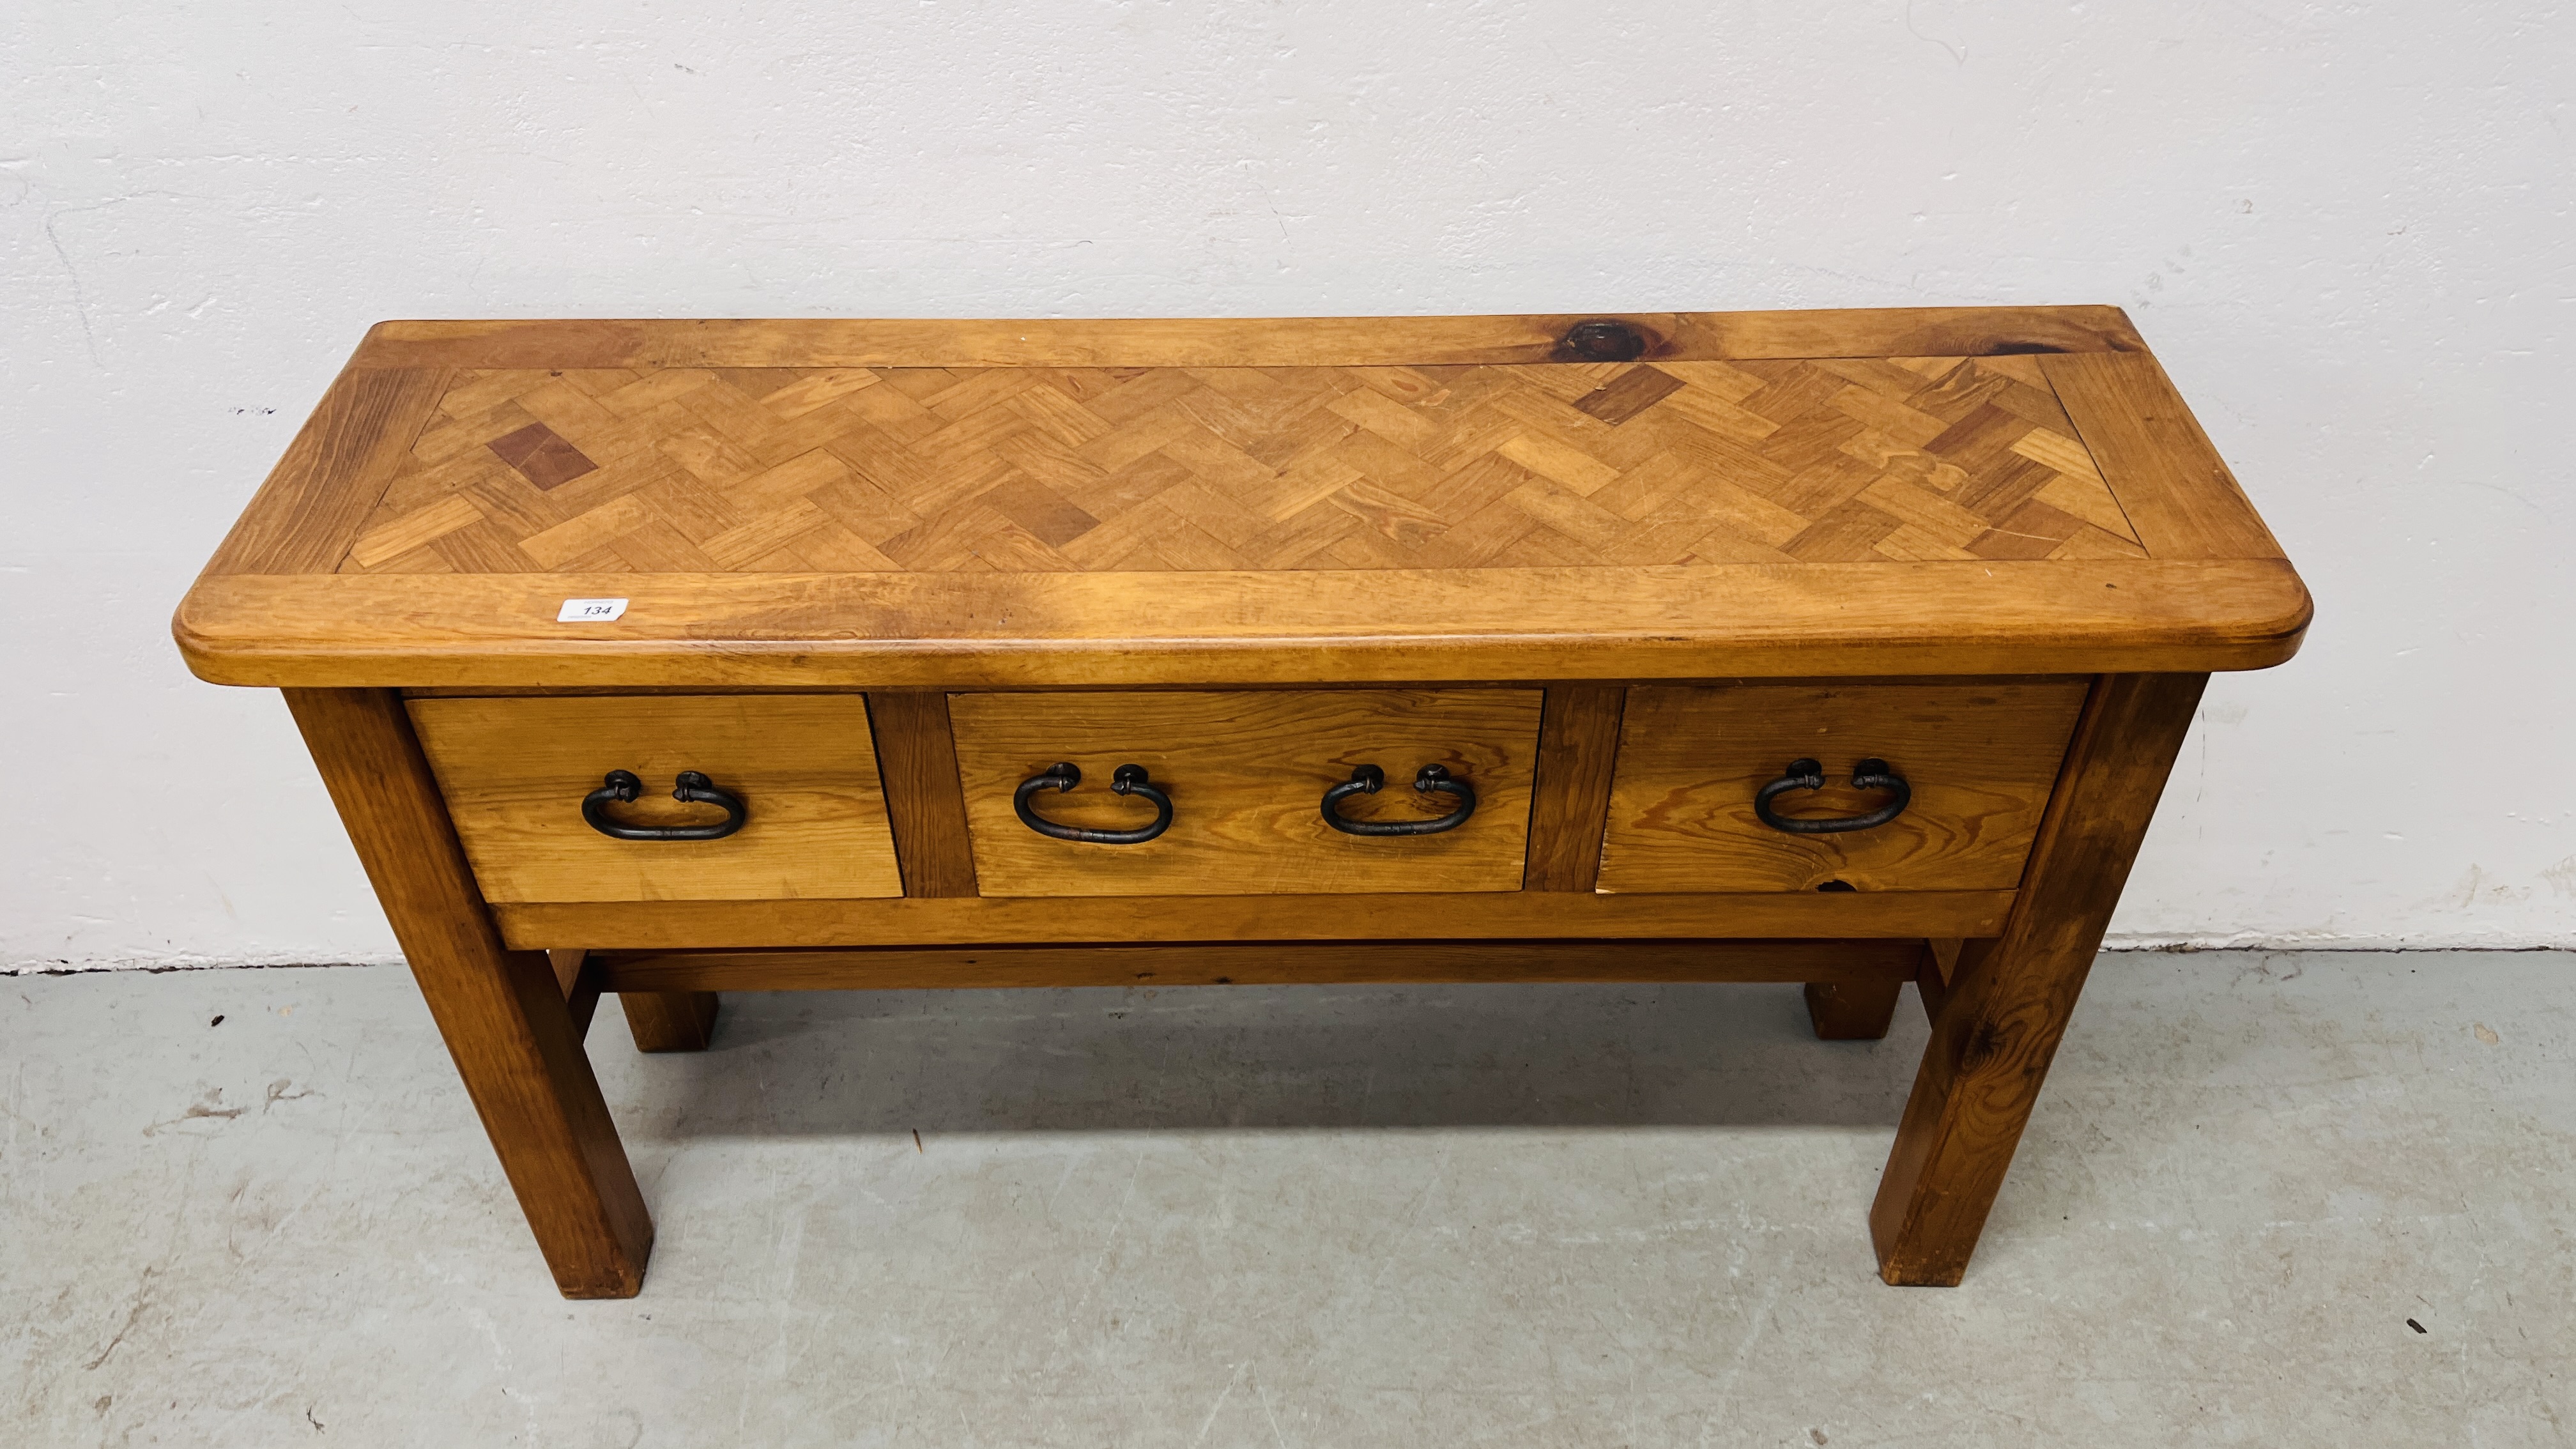 A SOLID BEECHWOOD AND PINE THREE DRAWER SIDE TABLE WITH RUSTIC IRON CRAFT HANDLES AND PARQUET - Image 2 of 12